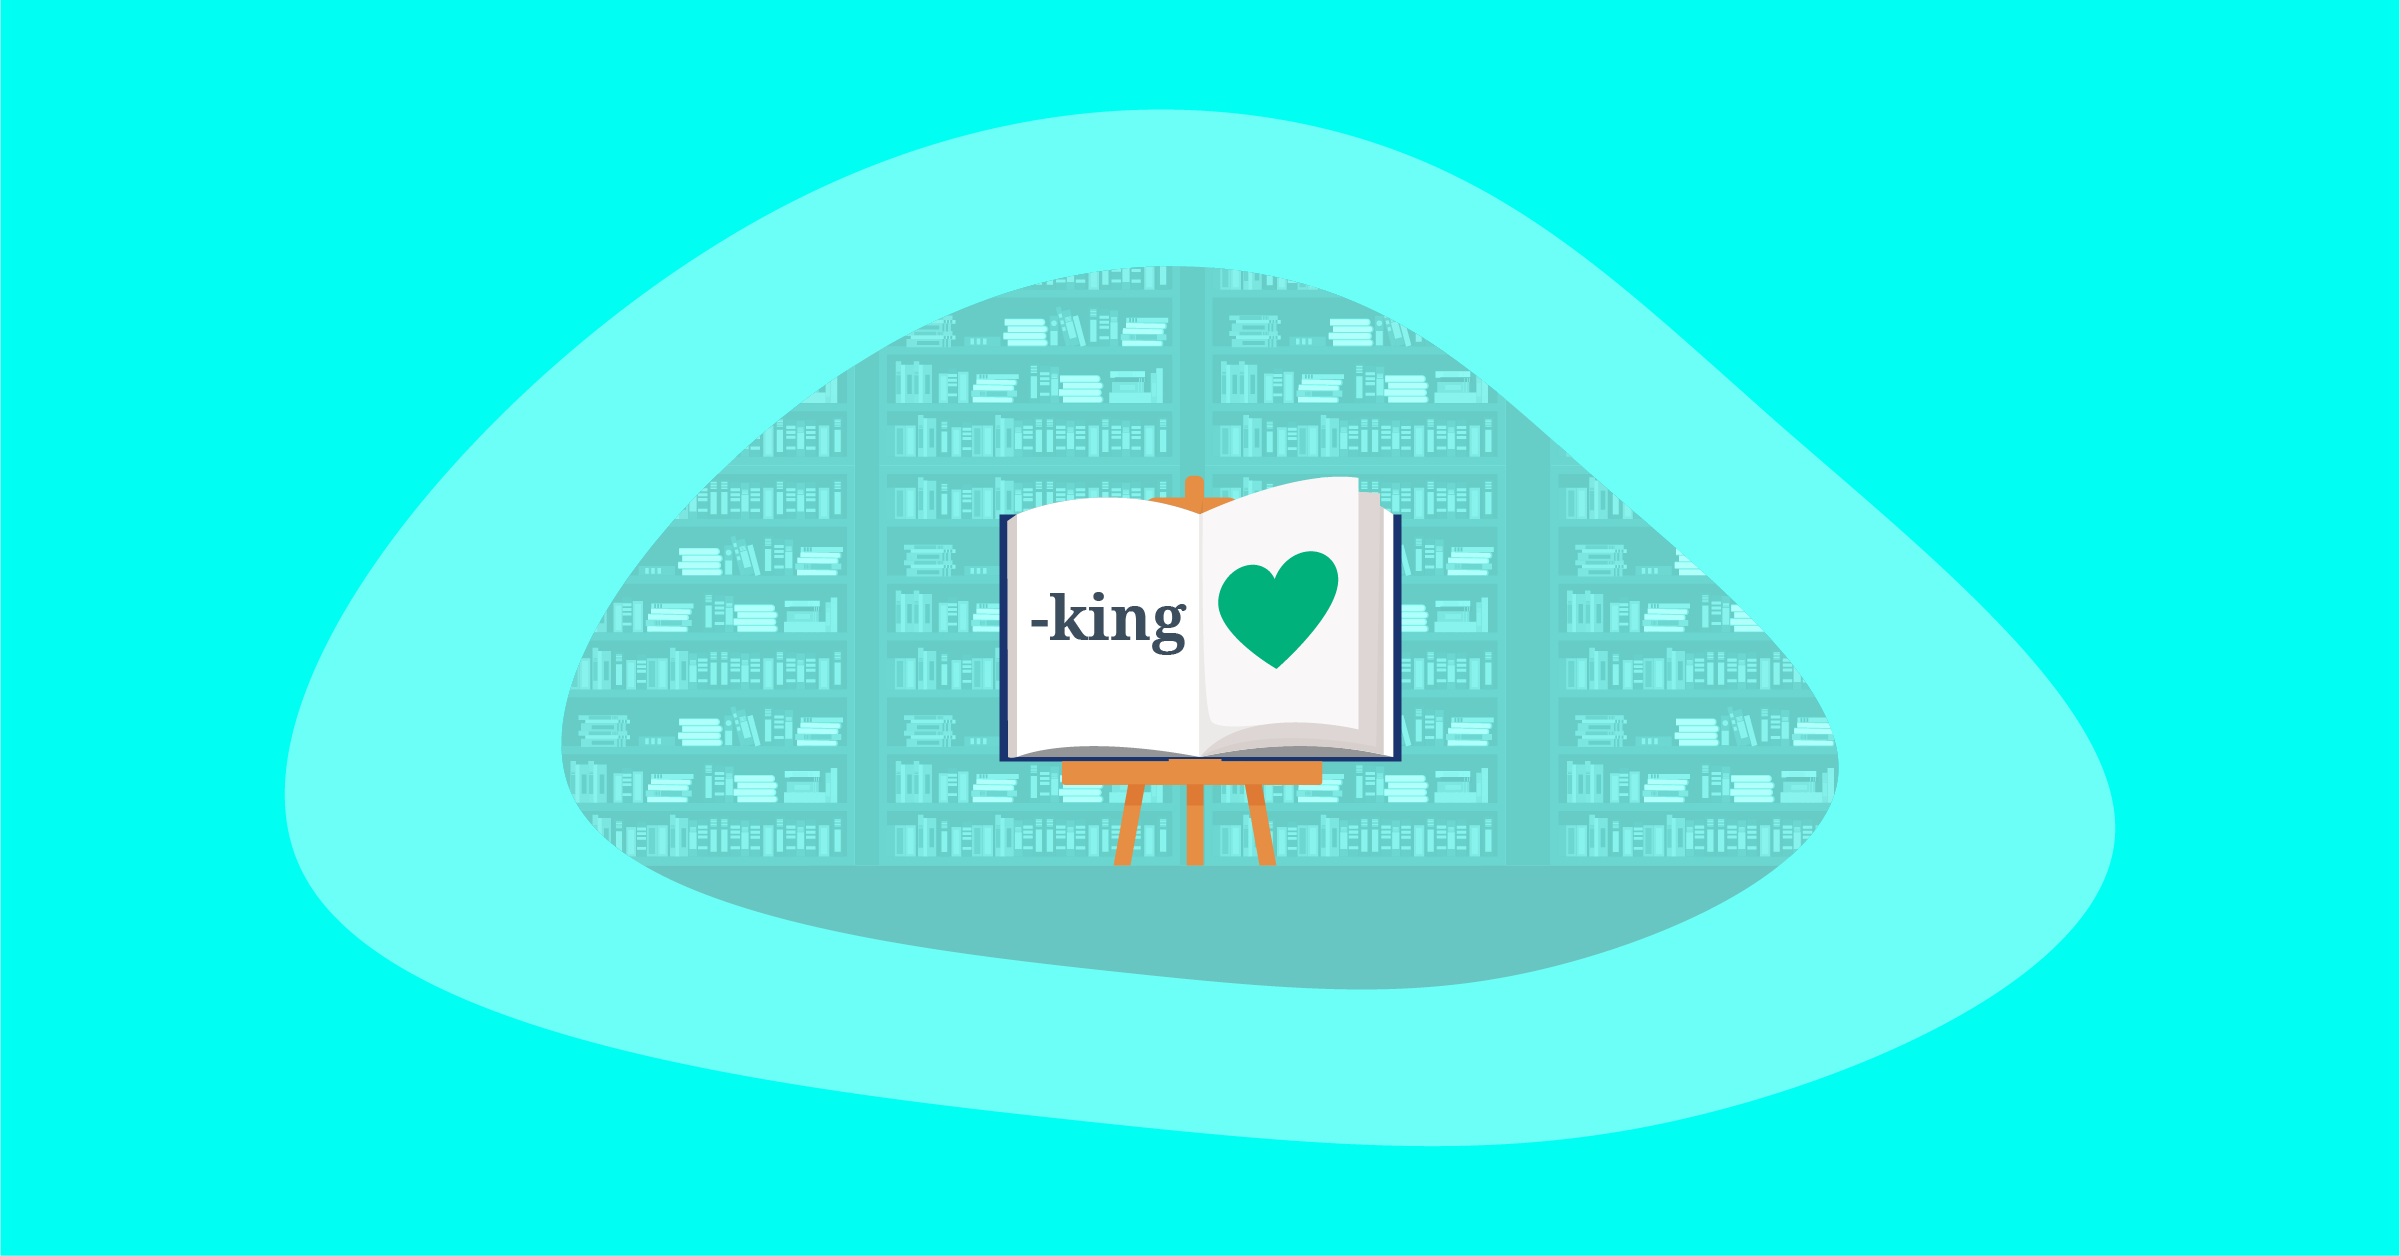 Illustration of all positive impactful words ending in -king